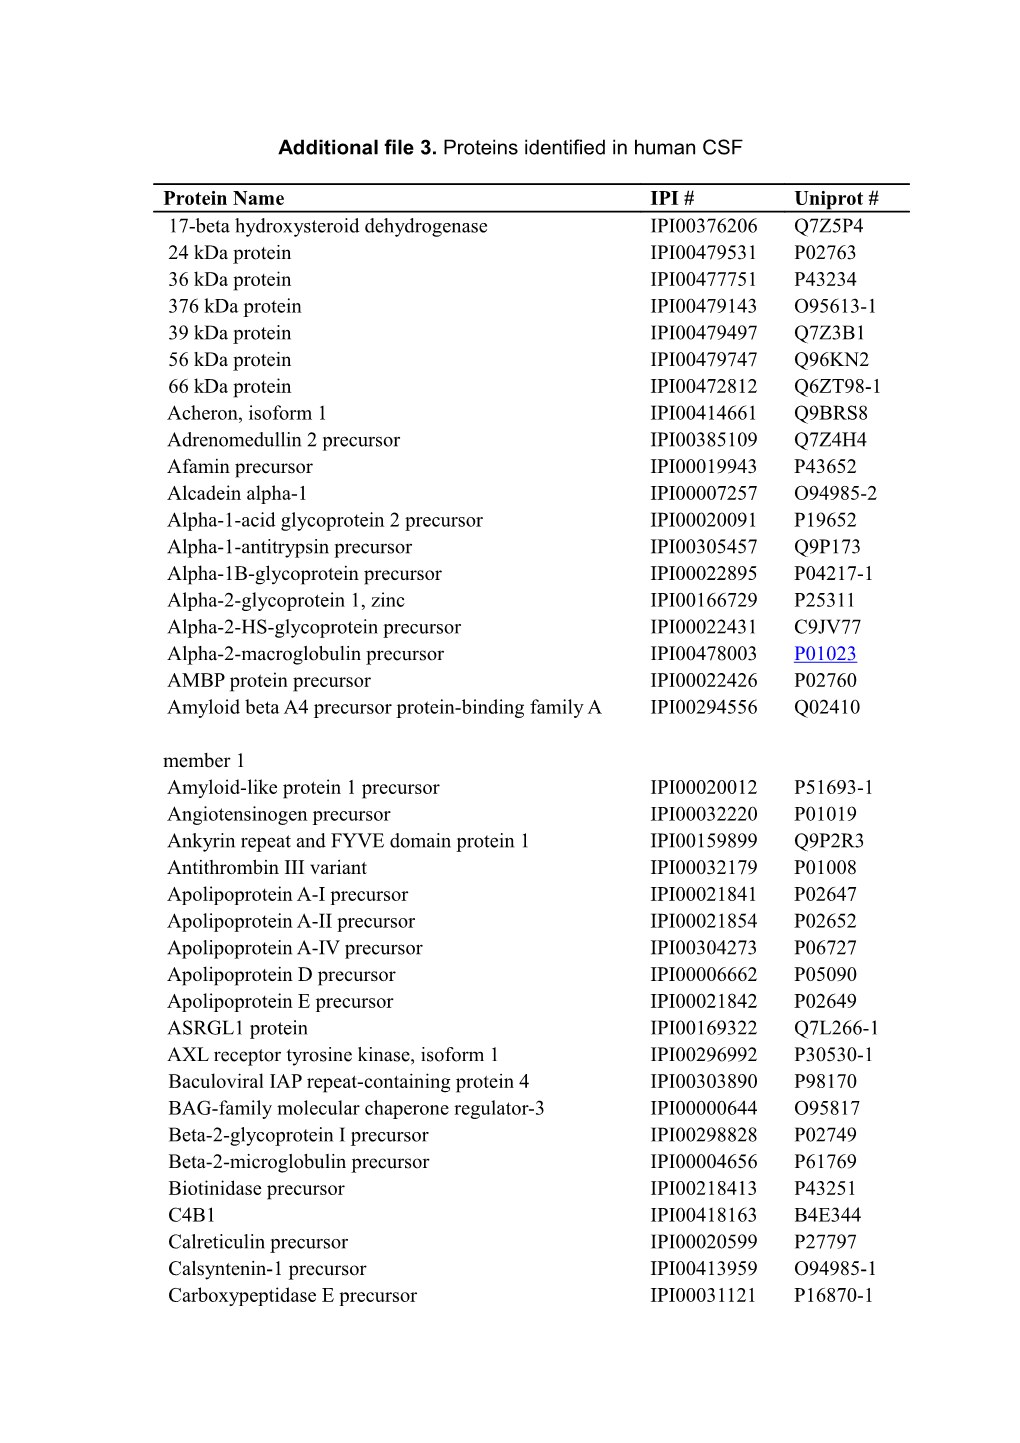 Additional File3. Proteins Identified in Human CSF